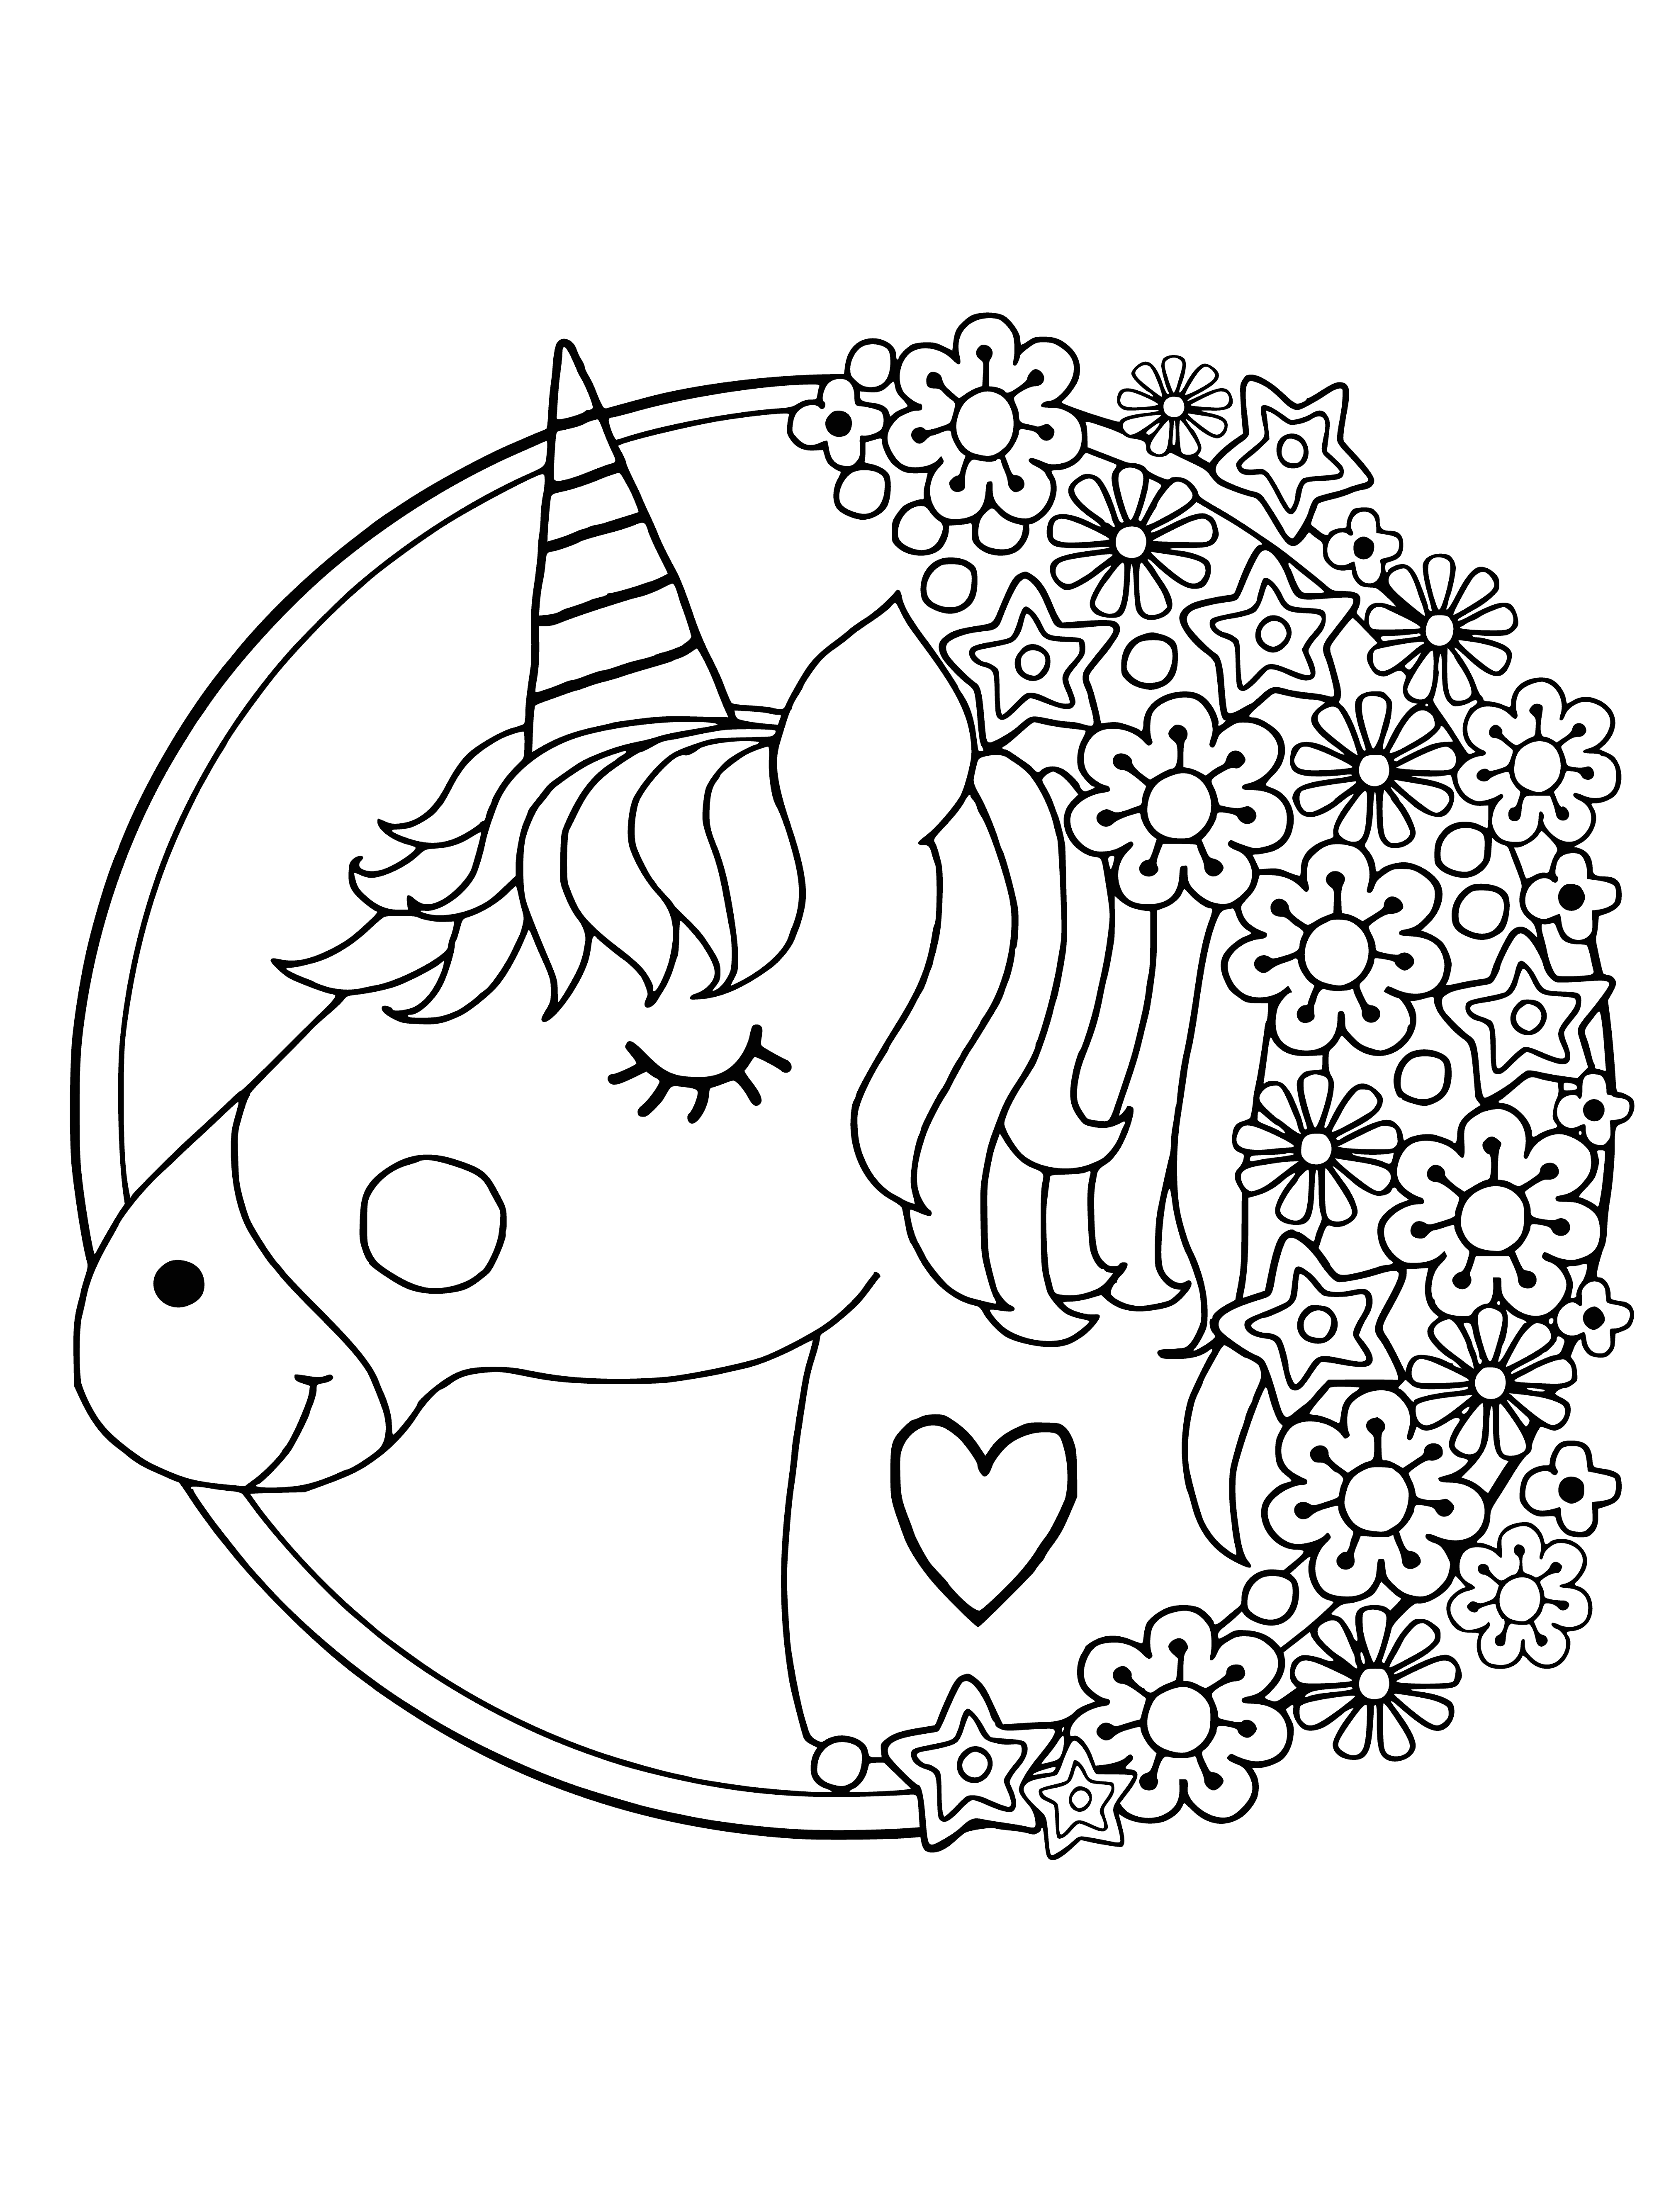 coloring page: Relax and de-stress with a magical Unicorn surrounded by stars, flowers, and butterflies!